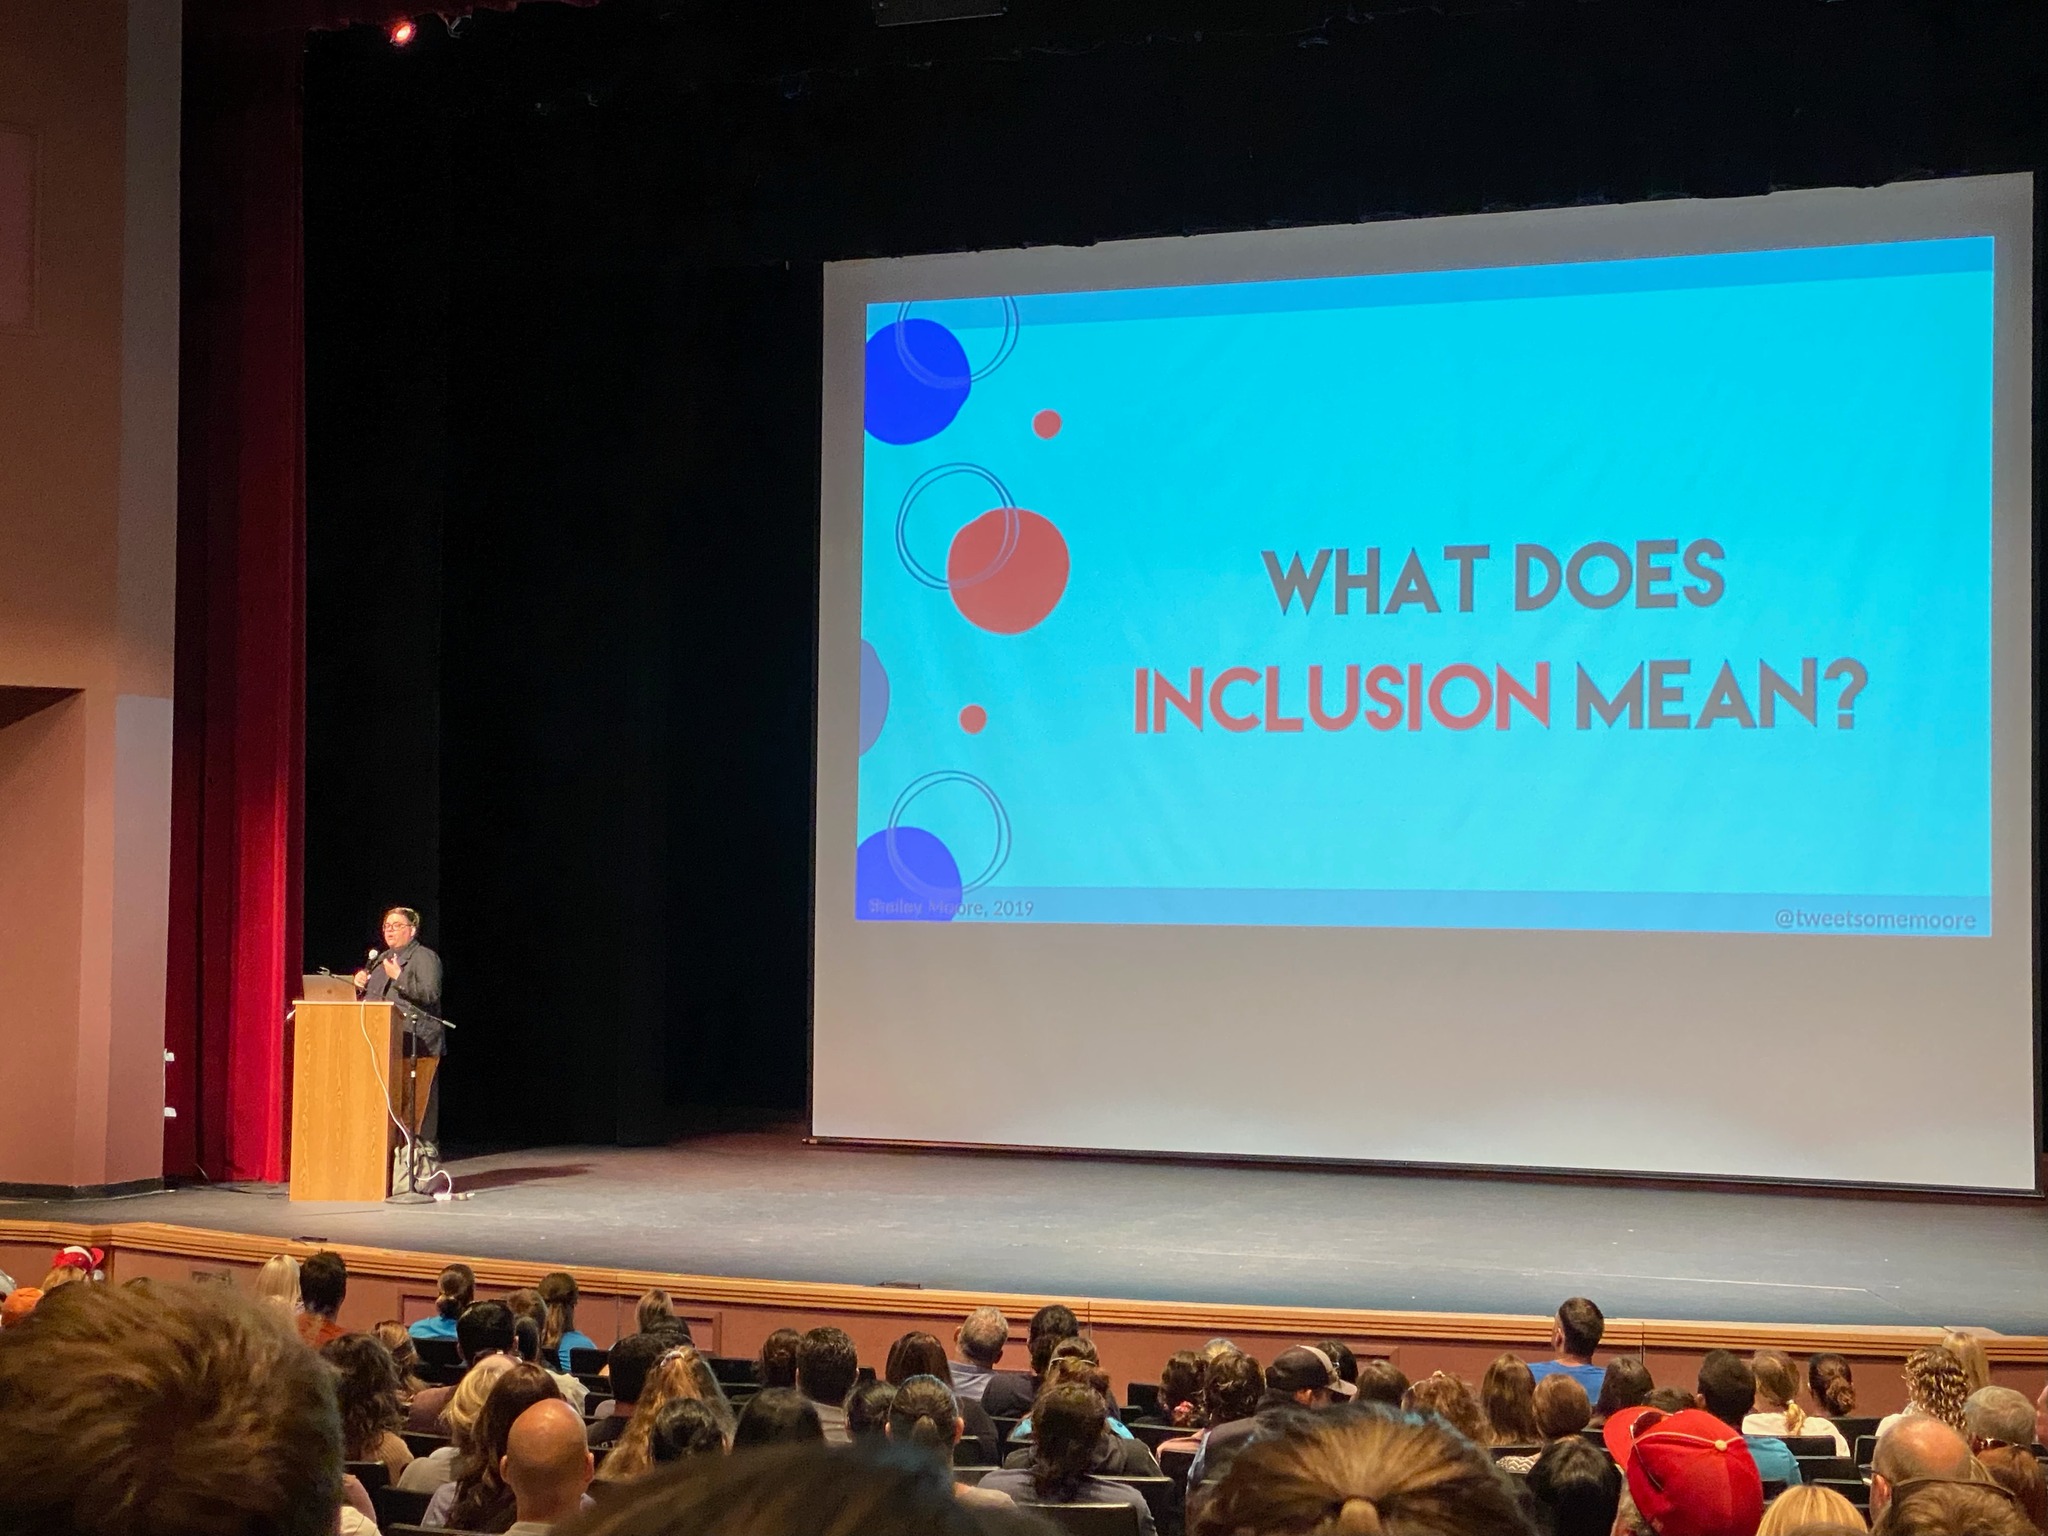 Shelley Moore is presenting the keynote on stage with "What Does Inclusion Mean" written on the large screen on stage.